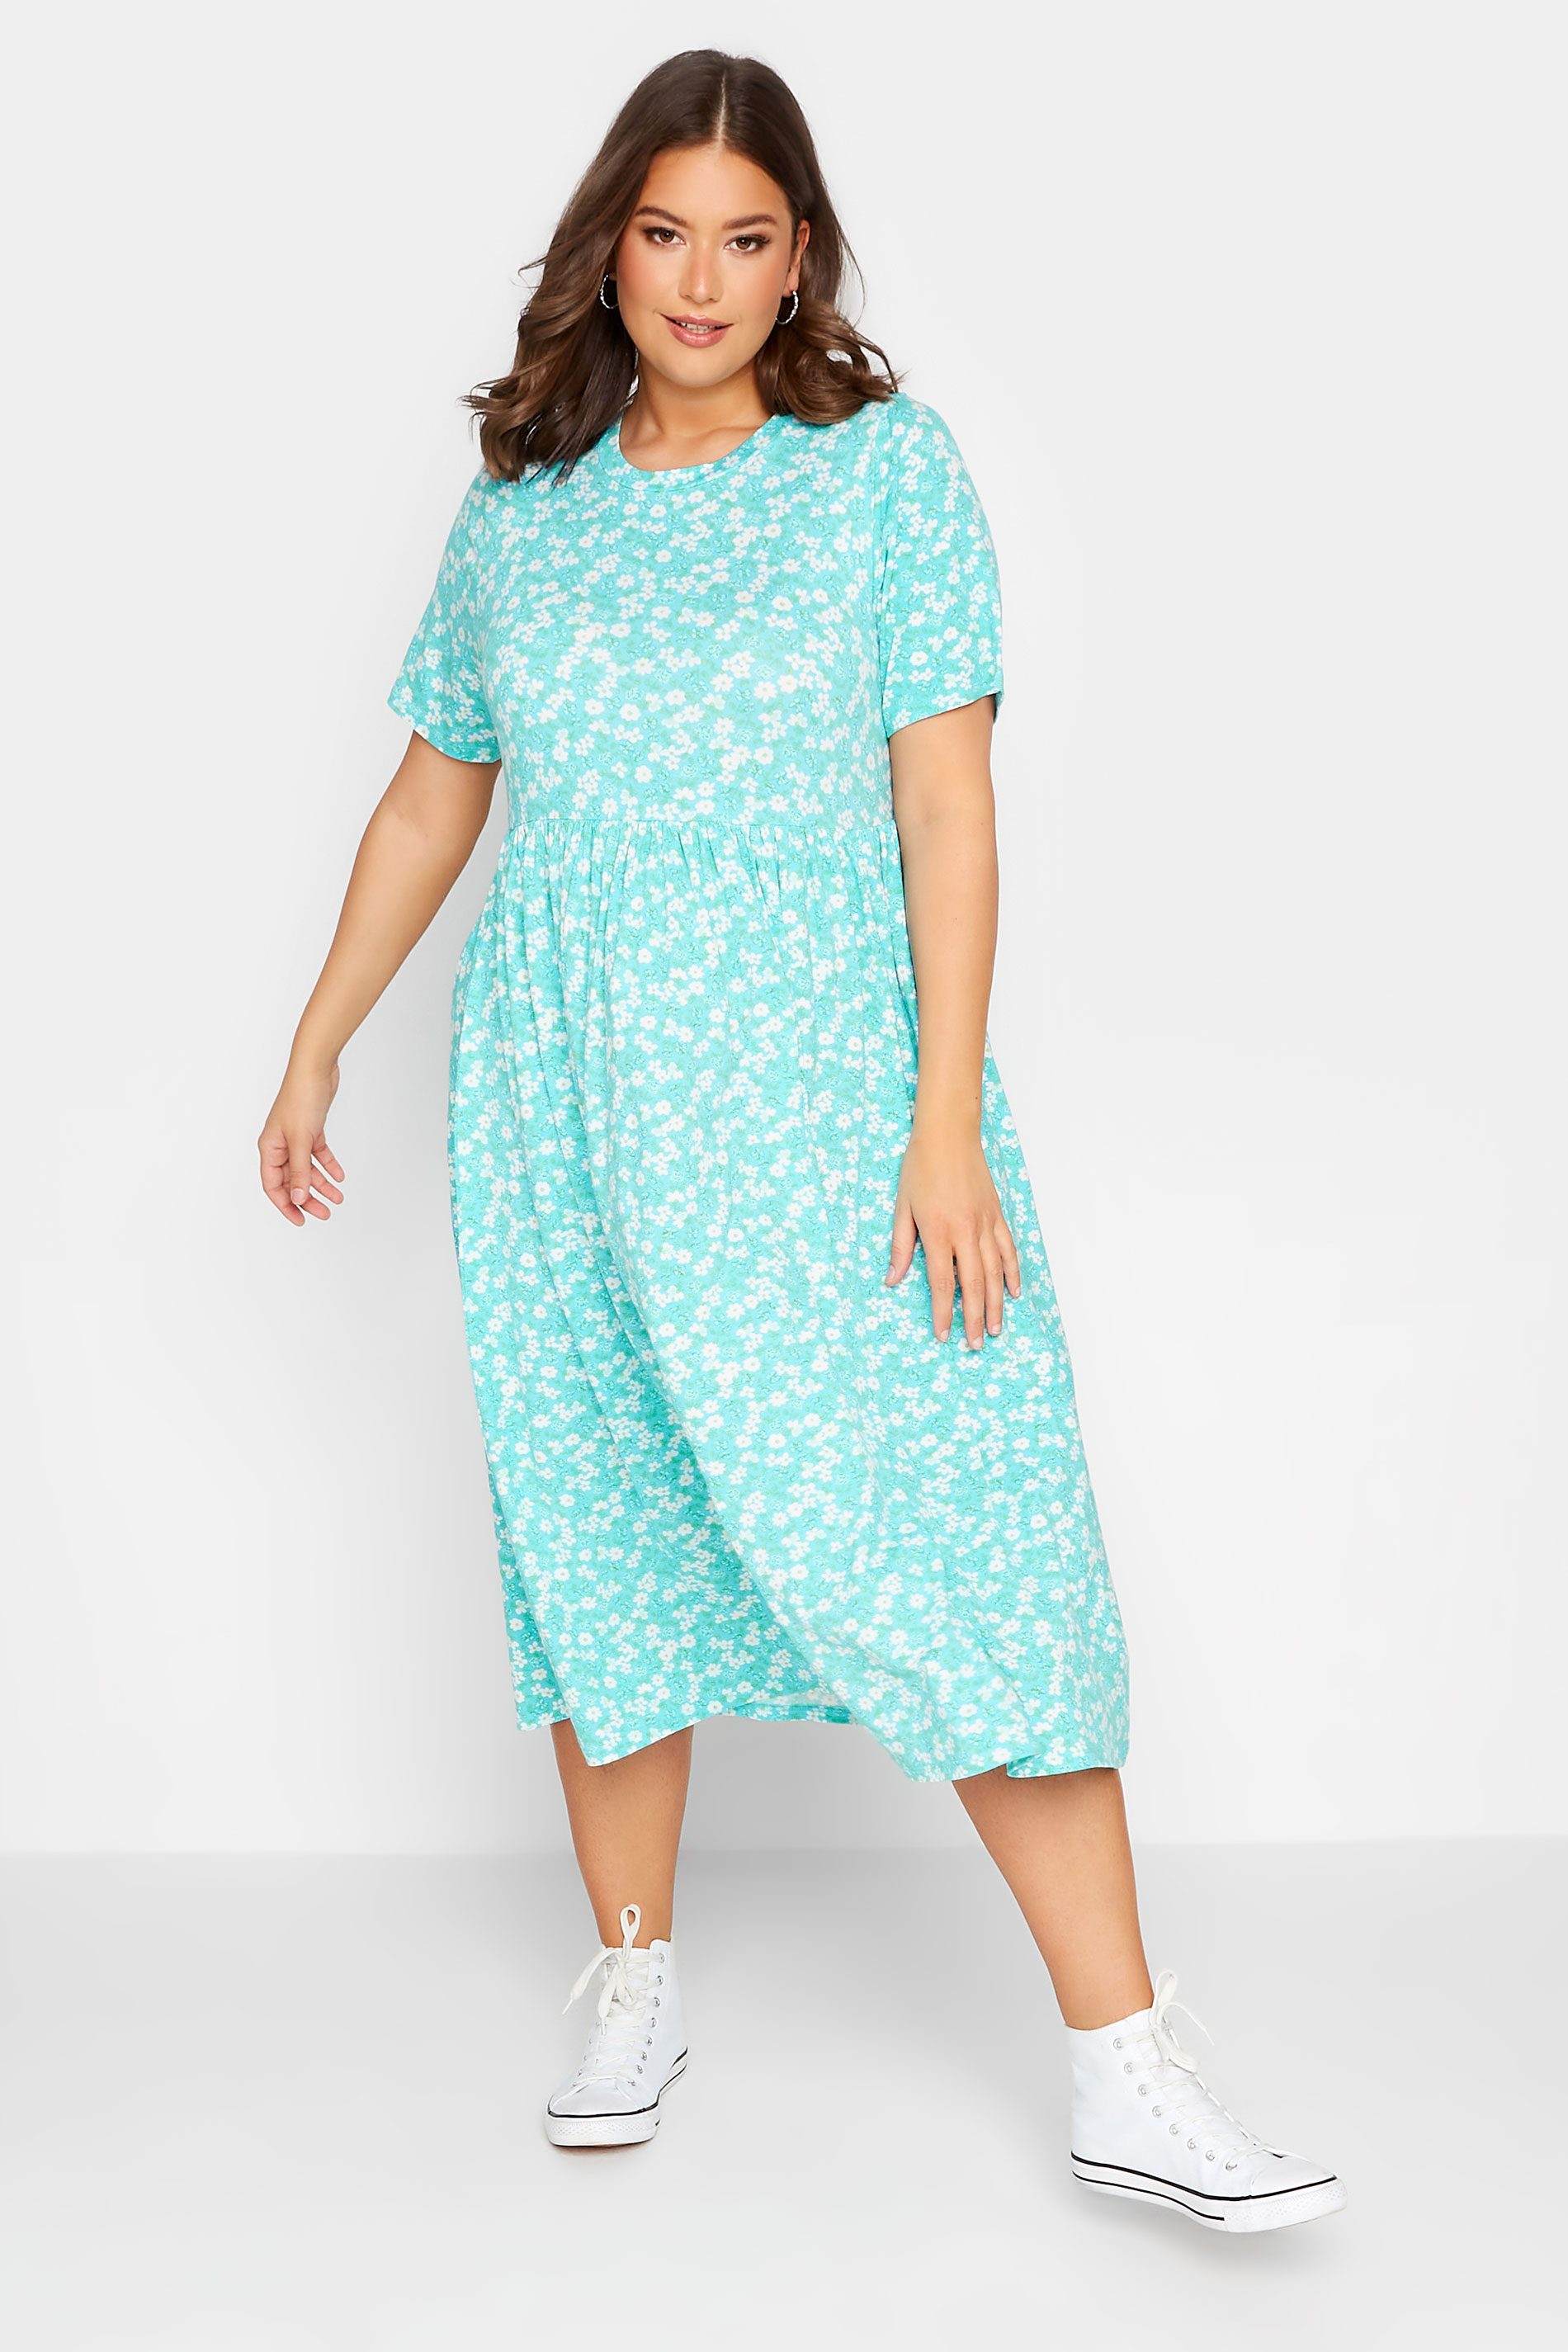 YOURS Curve Plus Size Light Blue Floral Disty Print Smock Dress | Yours Clothing  1